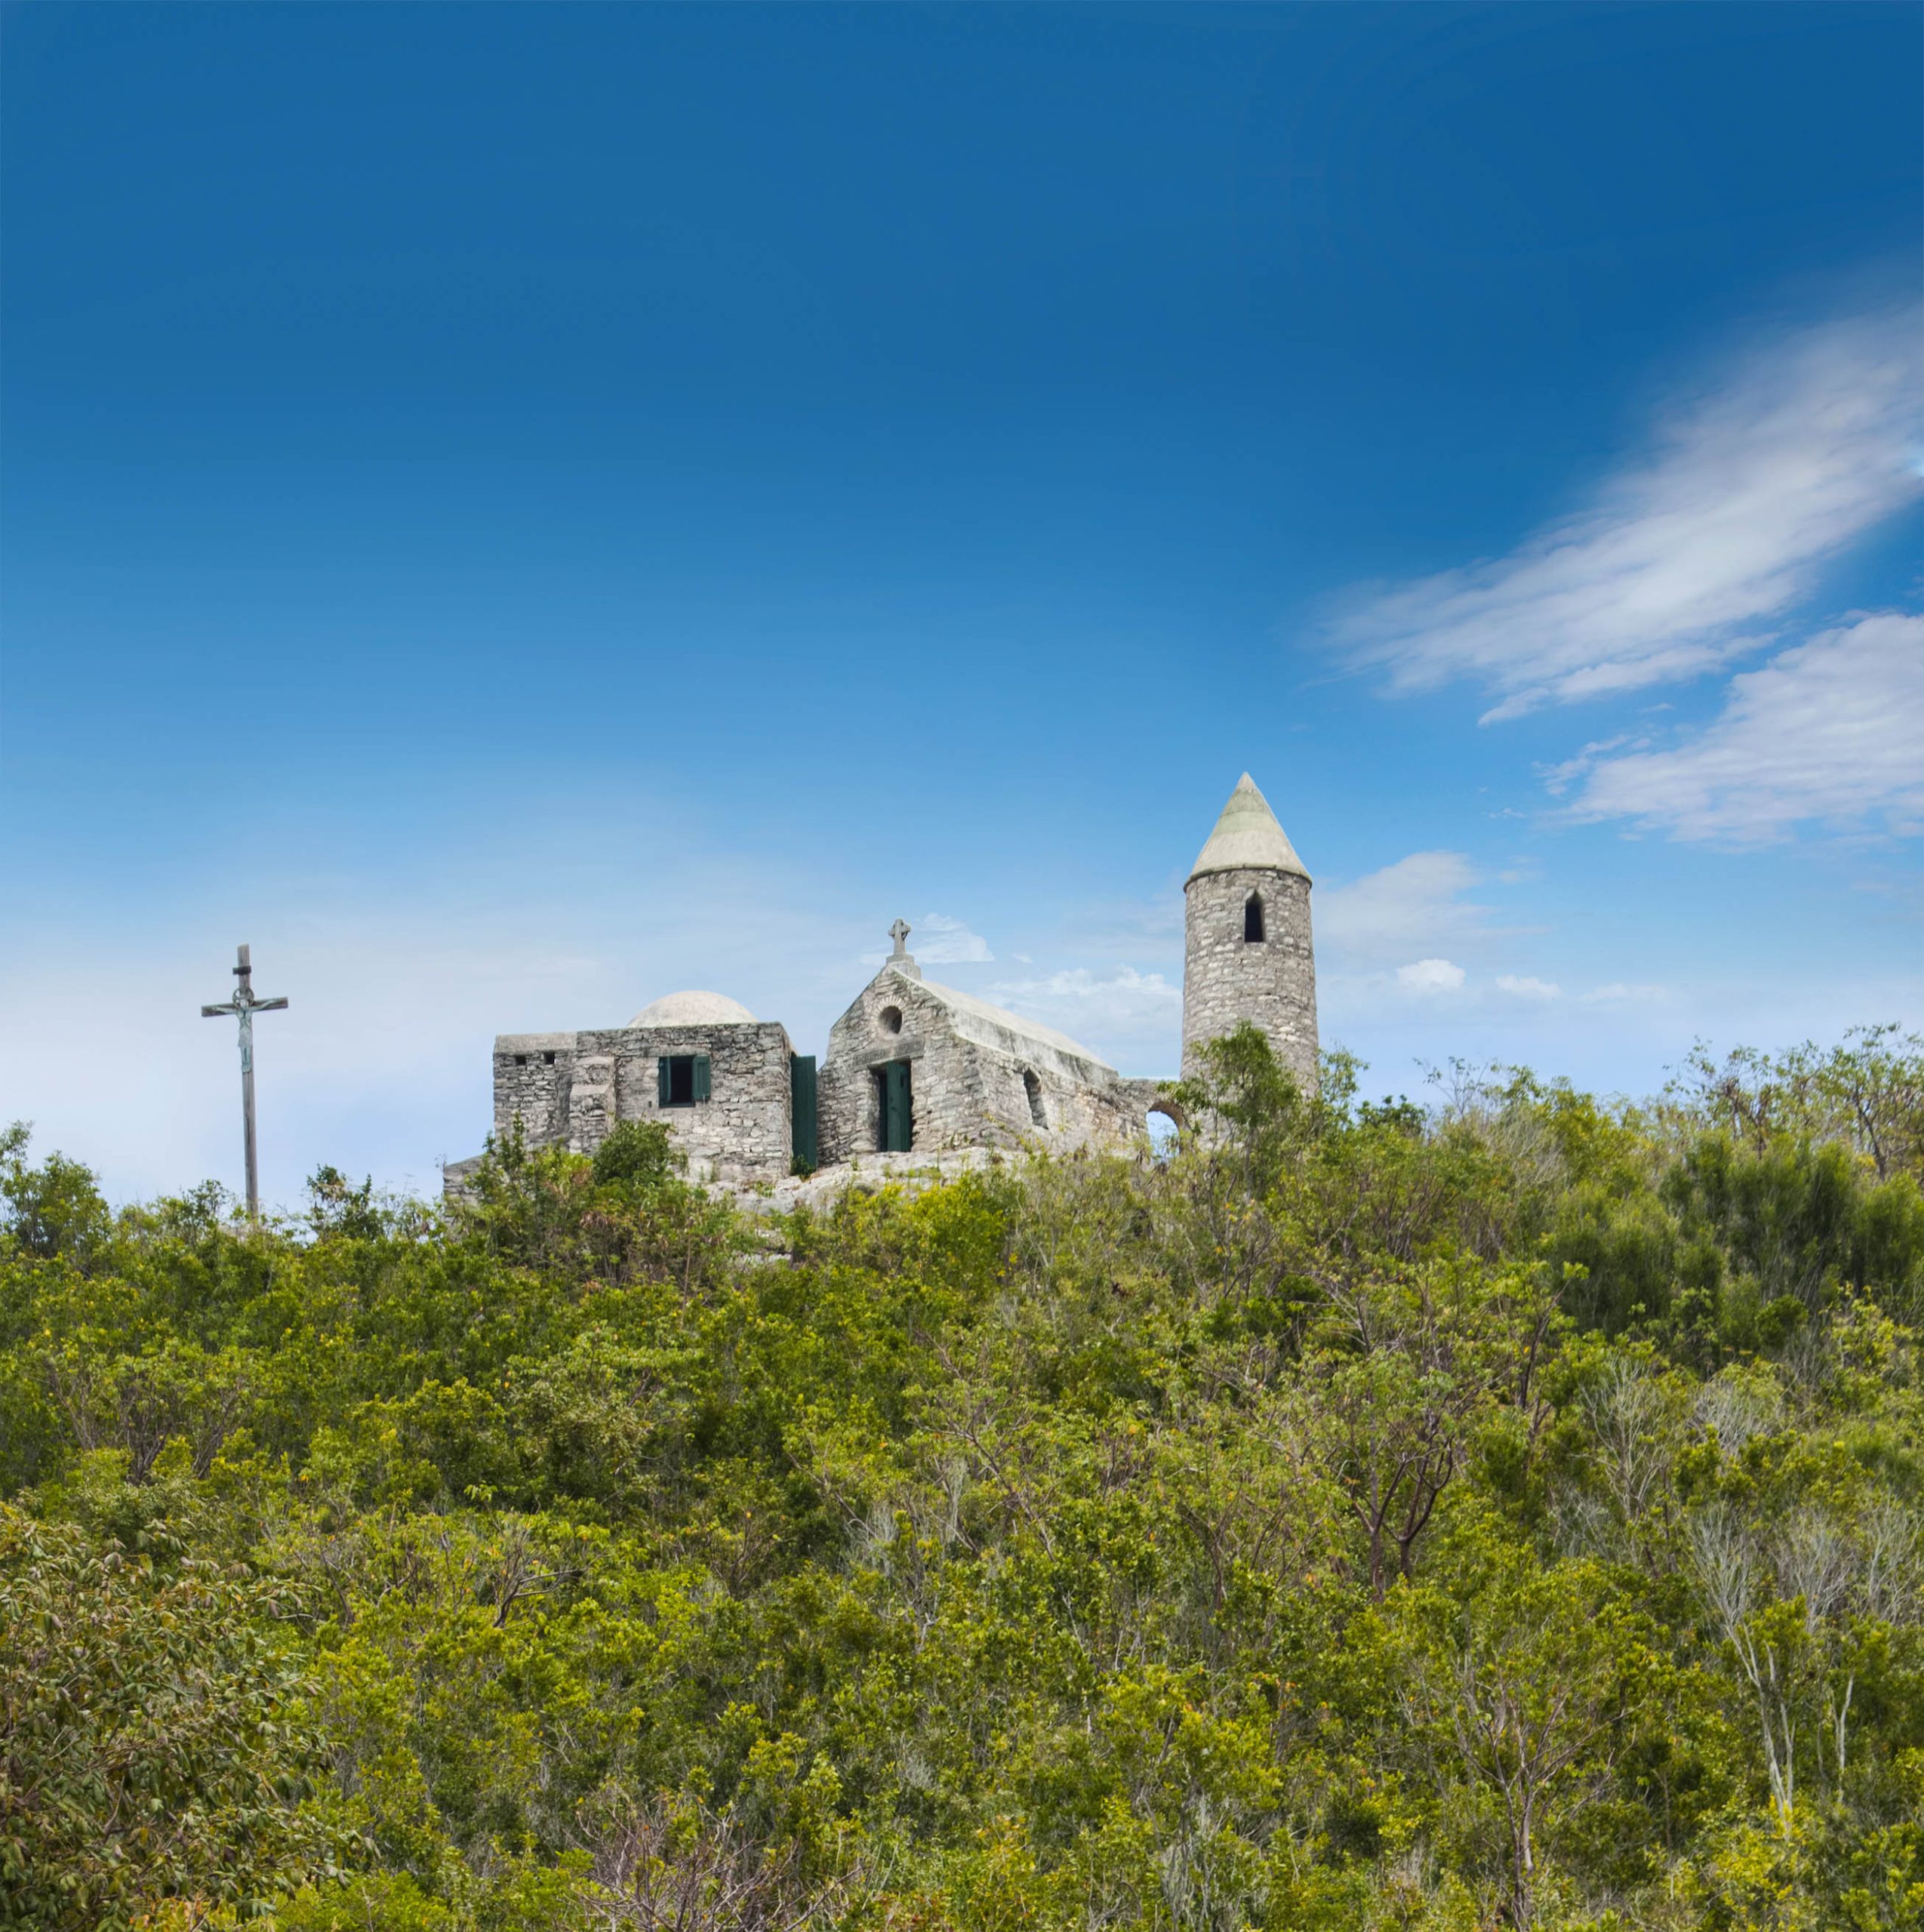 A stone church with a steeple sits atop a green hill under a clear blue sky. A tall cross stands to the left of the church.